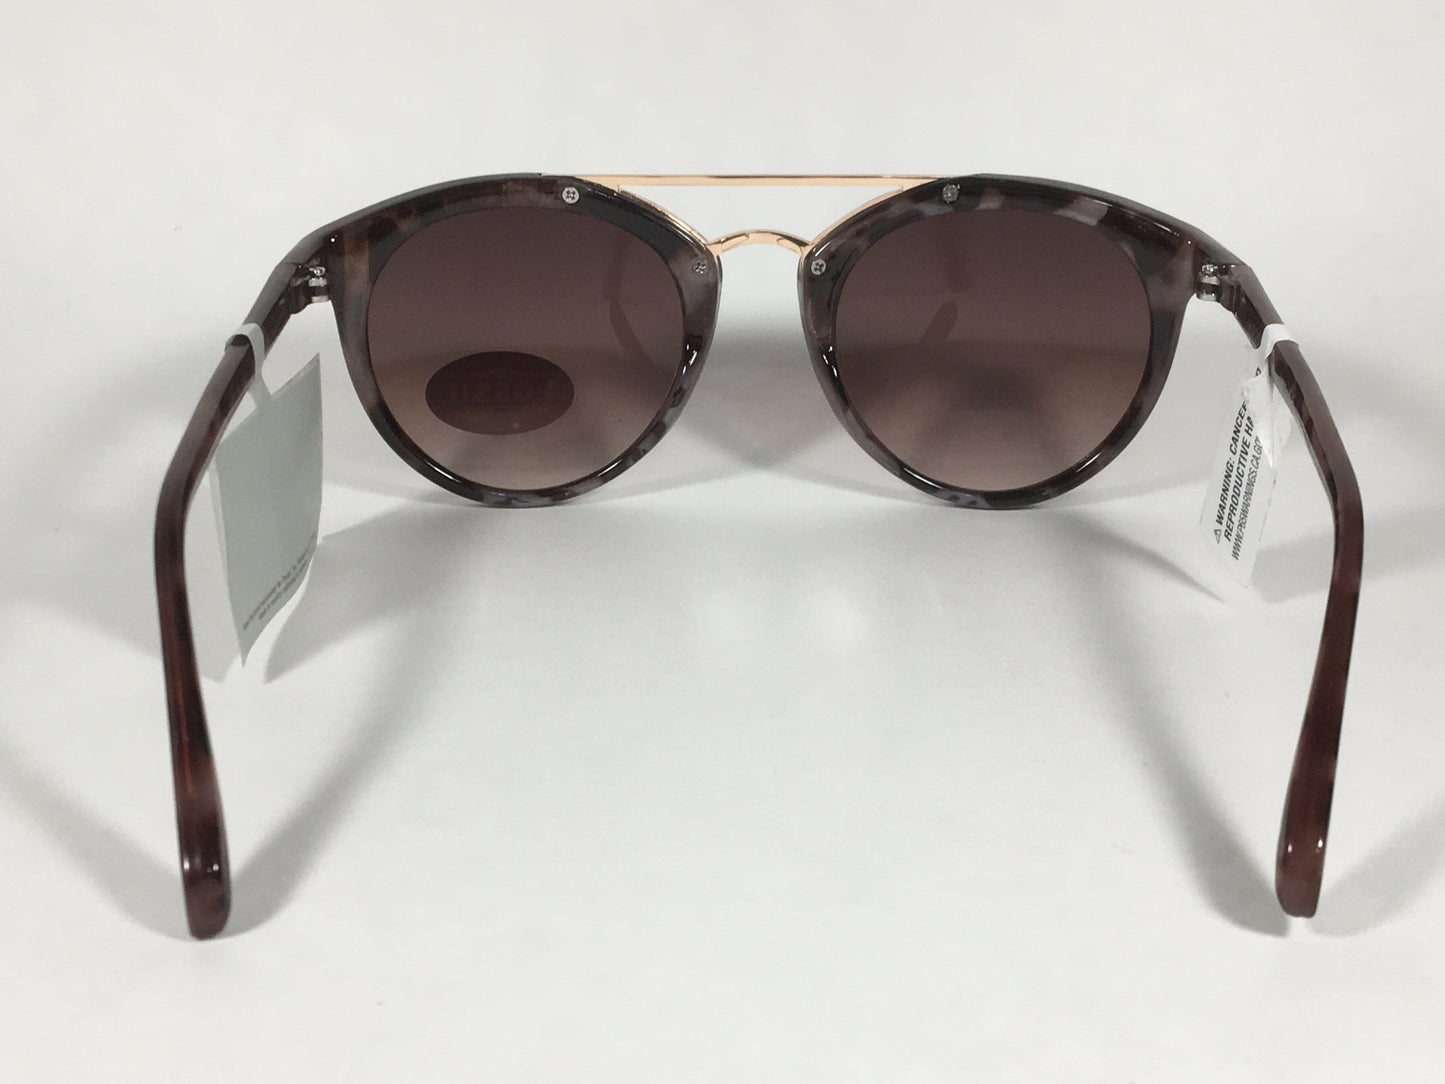 Fossil Round Brow Bar Sunglasses FW151 Brown Frame Brown Gradient Lens - Sunglasses